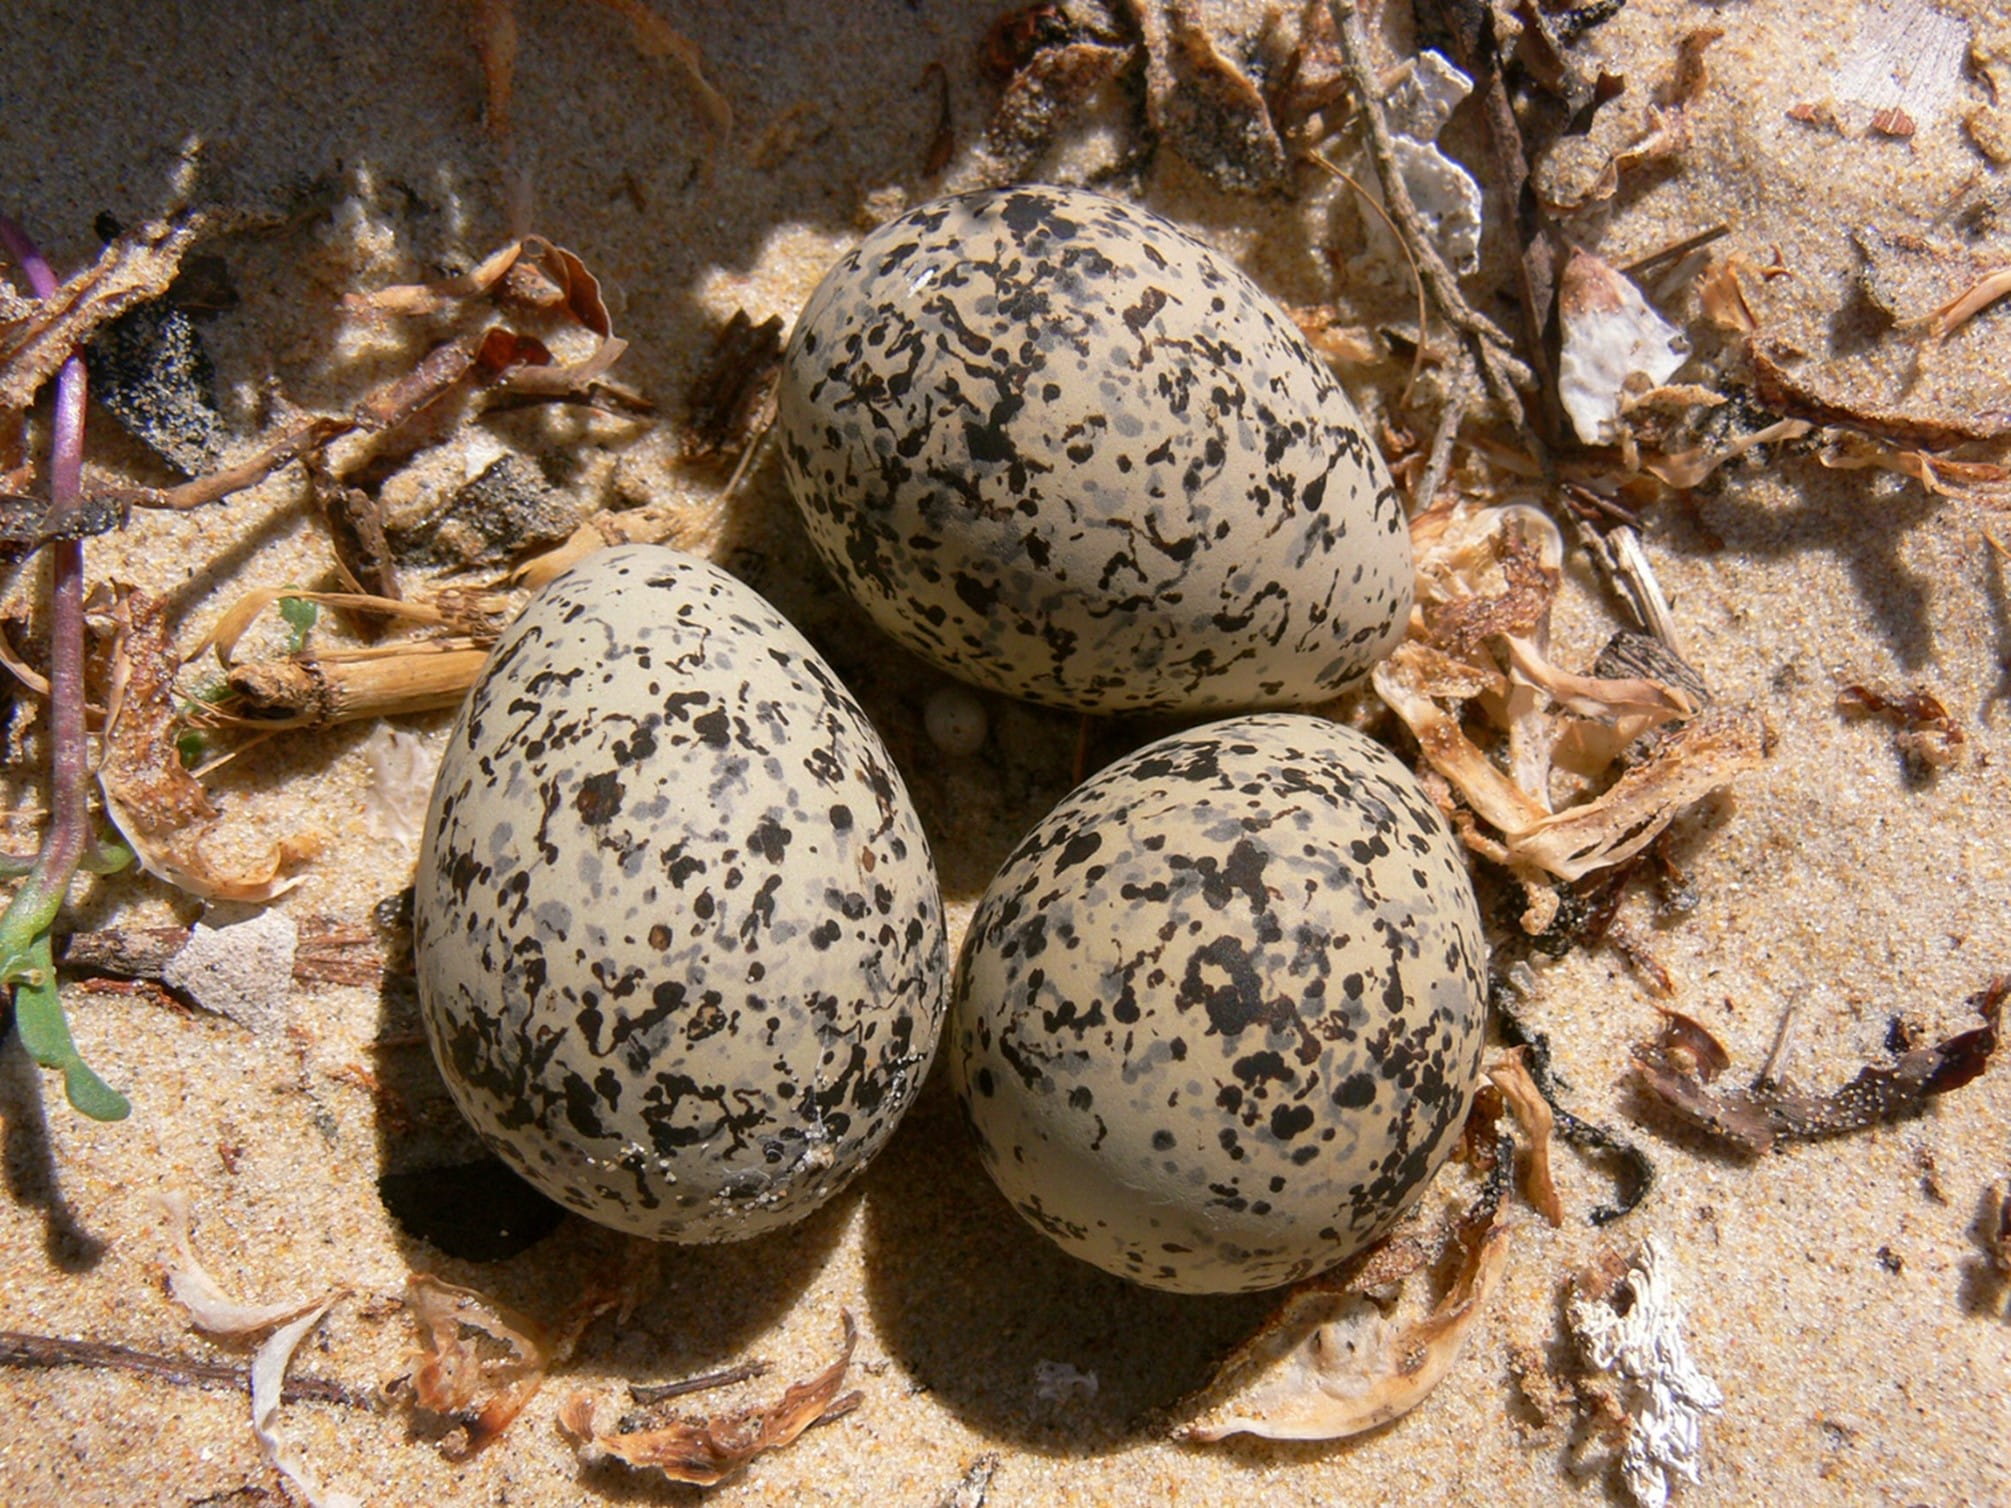 Three speckled eggs lie on the sand with a small amount of detritus